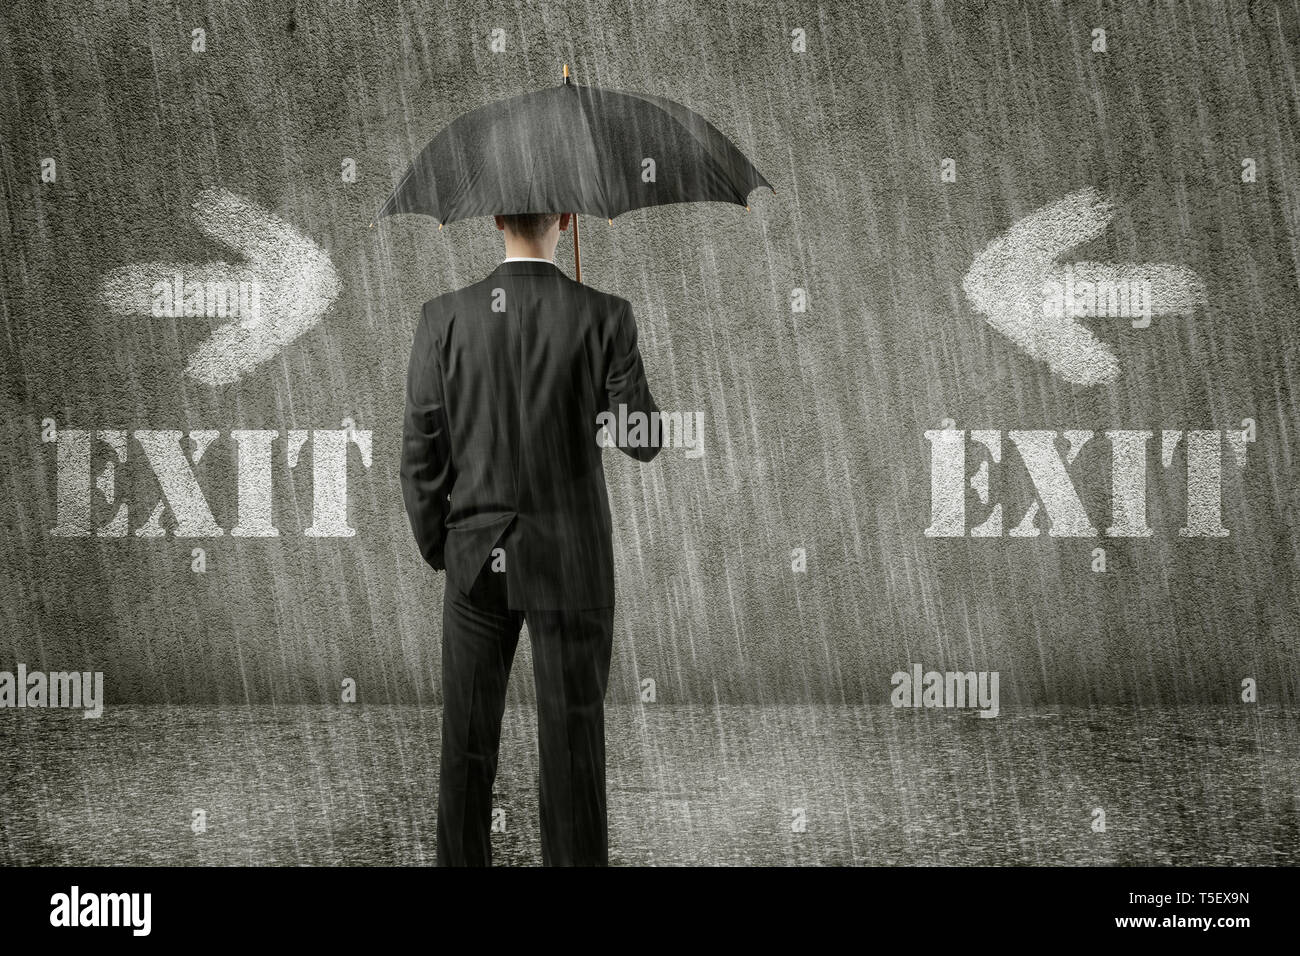 Trapped unhappy businessman is standing in front of wall on a gloomy day and has no way out of his hopeless situation - business concept Stock Photo